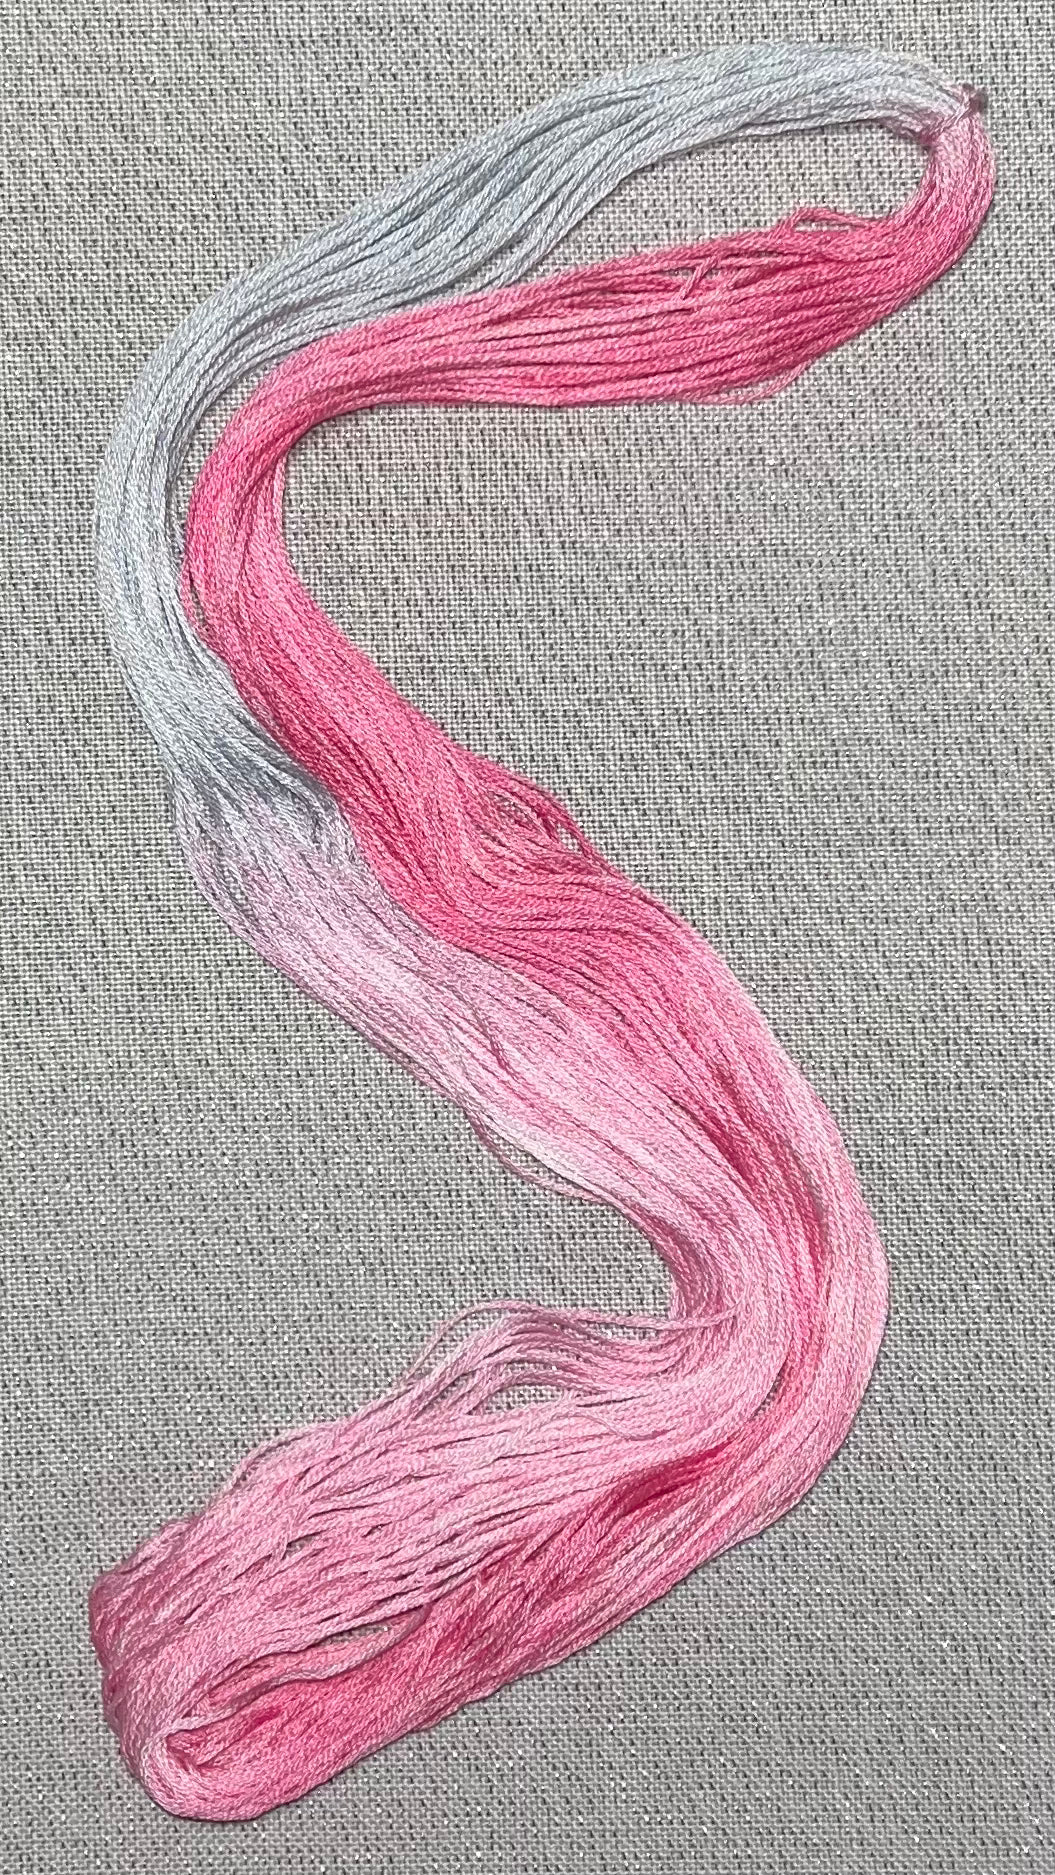 Cotton hand dyed floss - Pretty in Pink